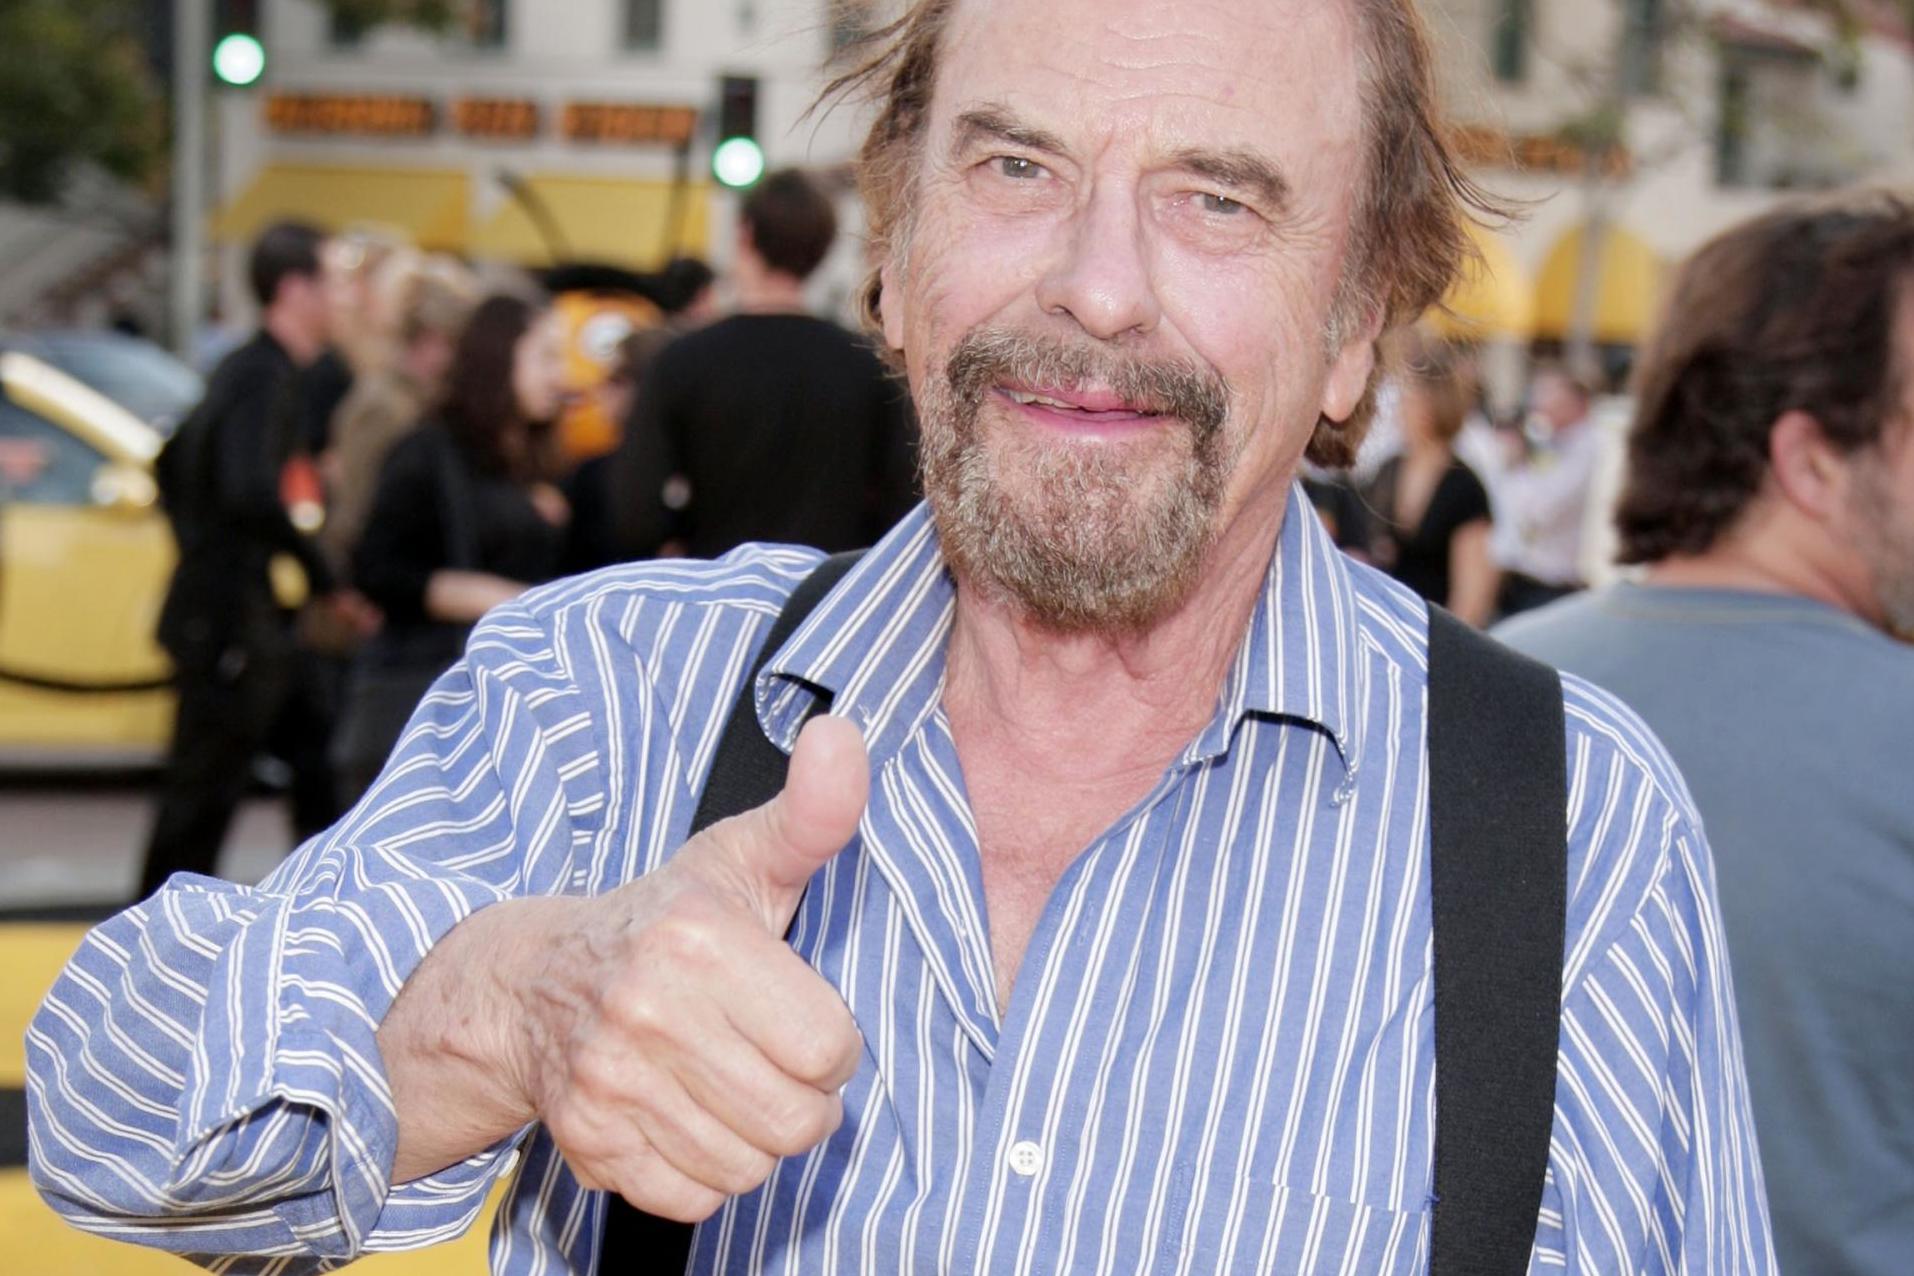 Rip Torn at the premiere of 'Bee Movie' on 28 October, 2007 in Los Angeles, California.